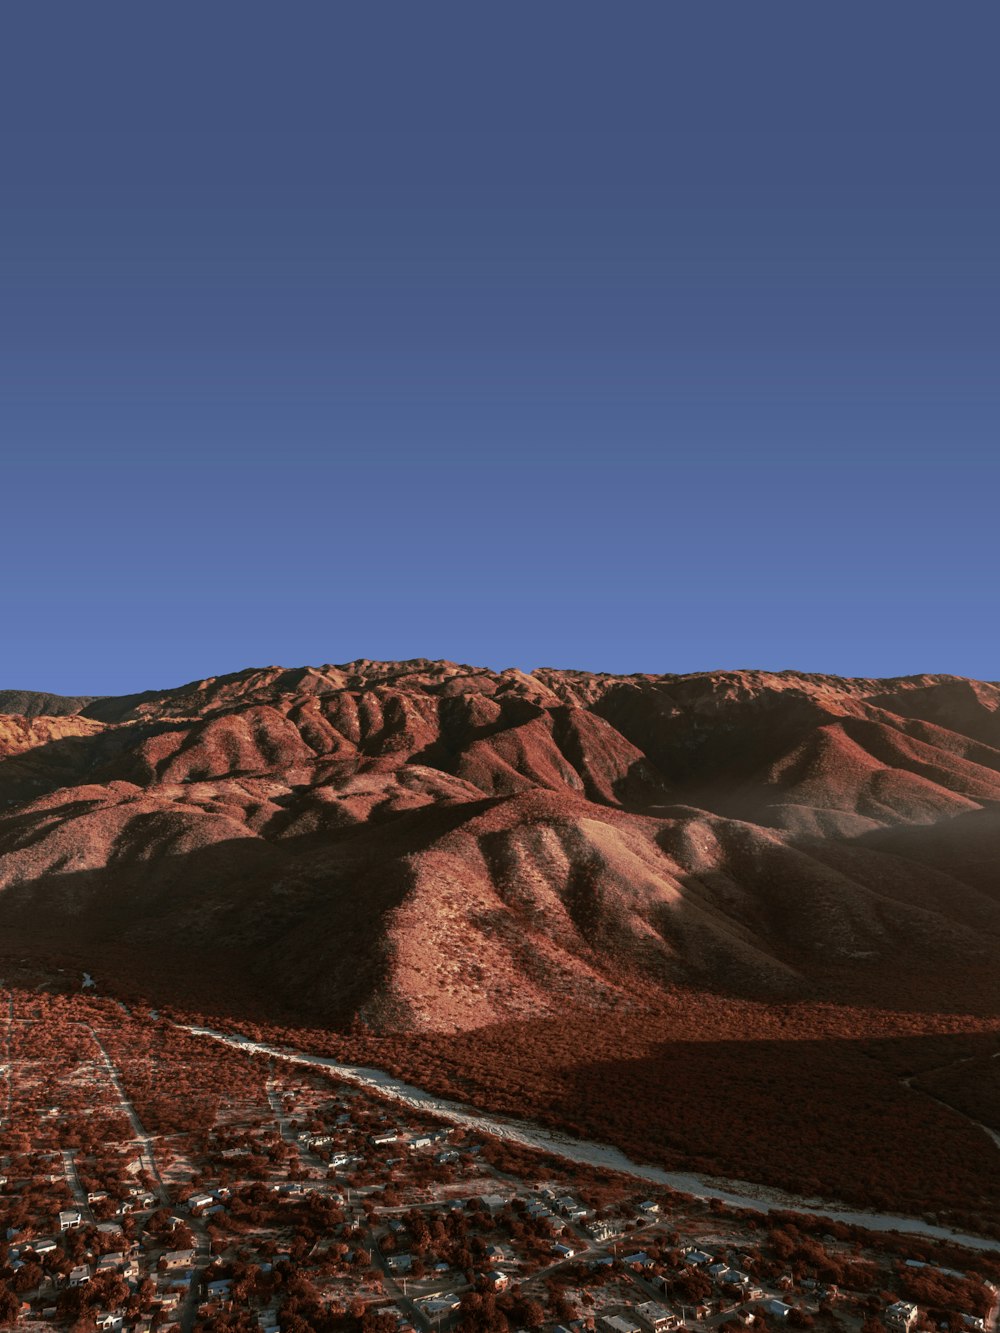 a view of a mountain with a road going through it